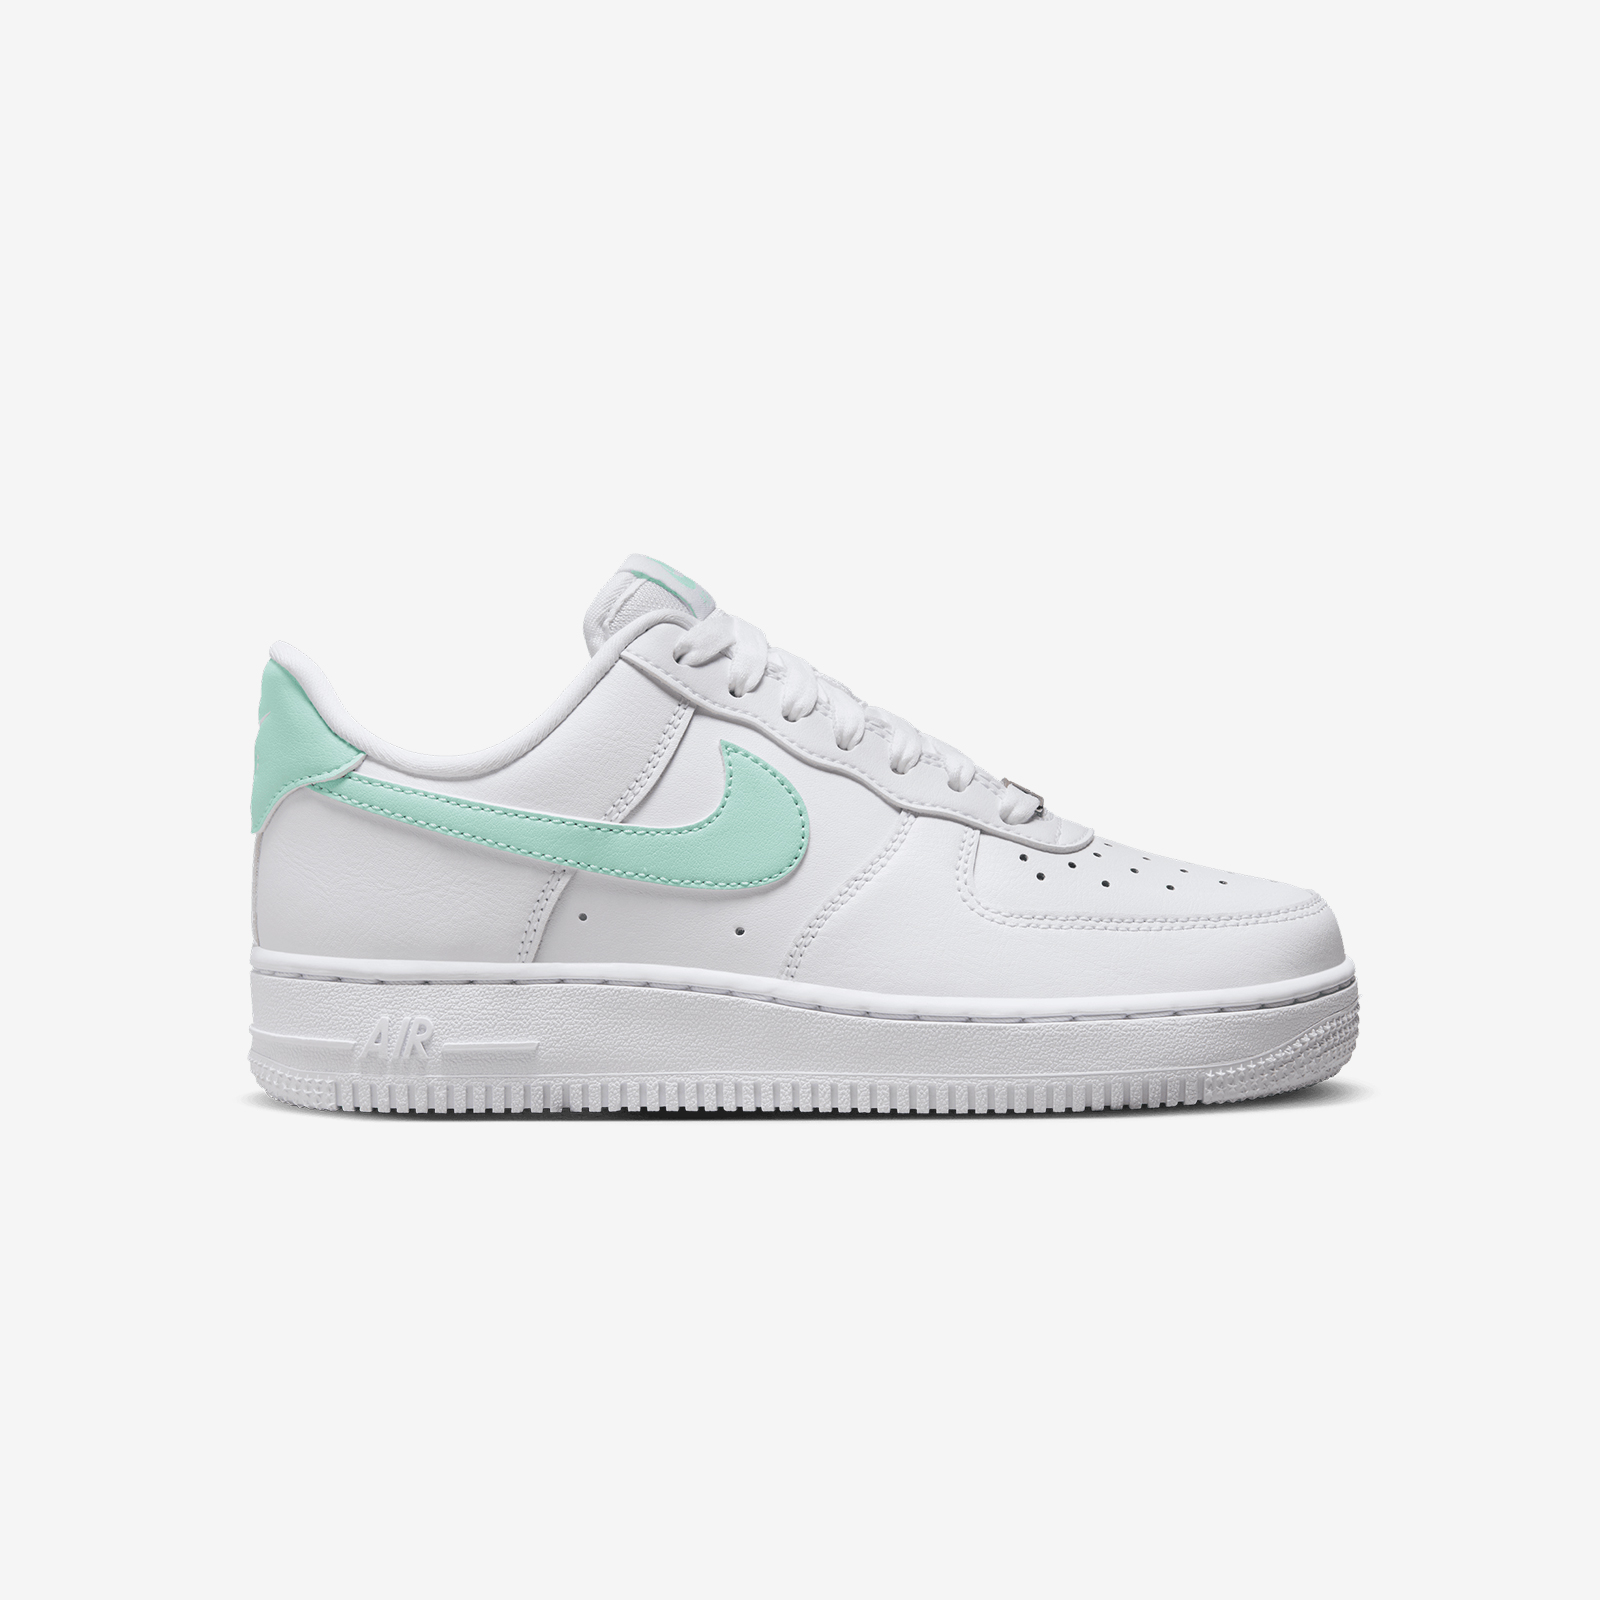 Nike ID Air Force 1 Low ESS 'Nike By You' Black Lilac